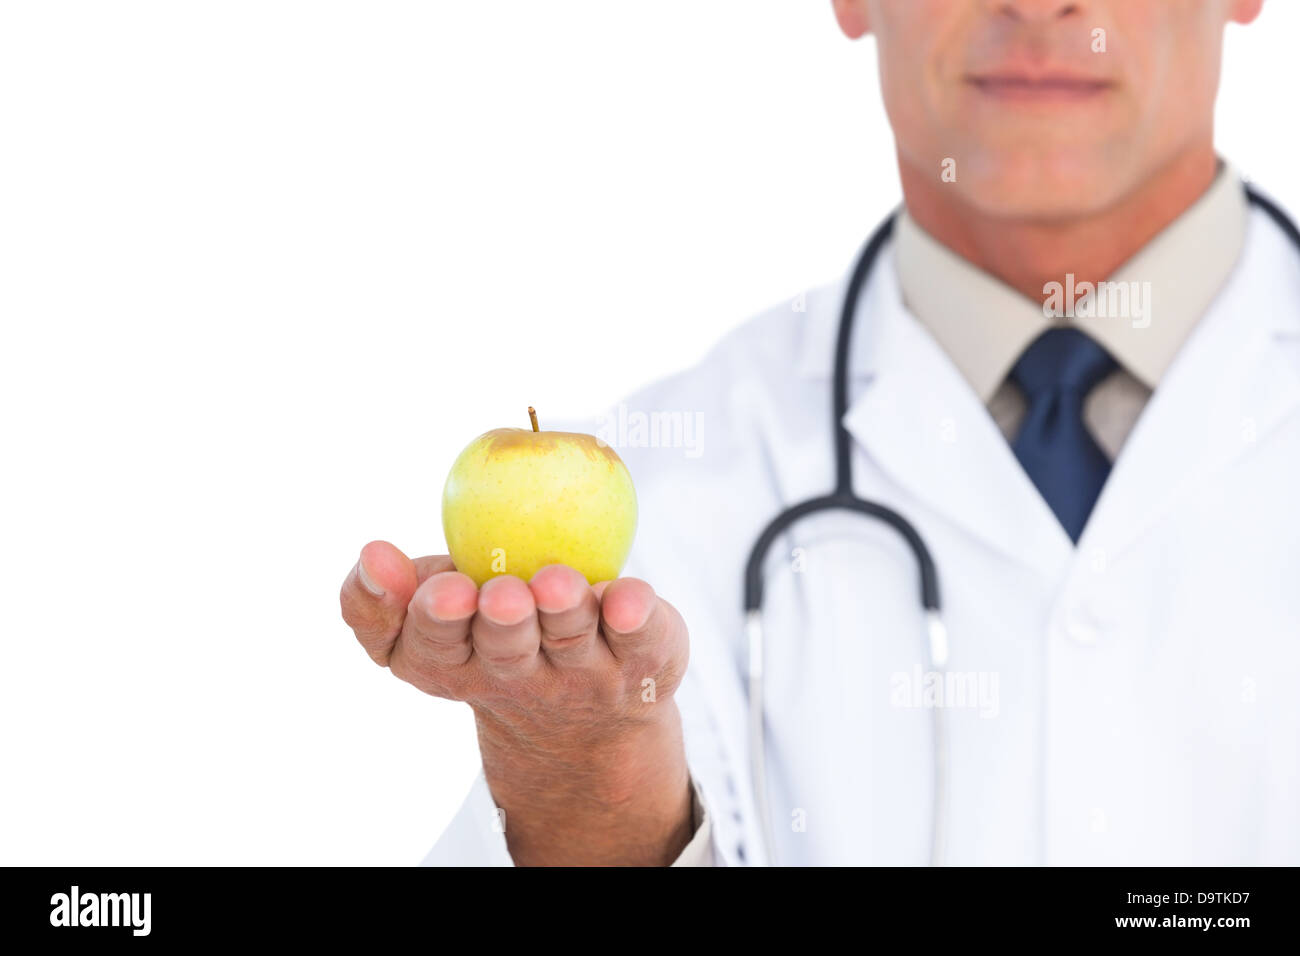 Focus shot on apple held by doctor Stock Photo